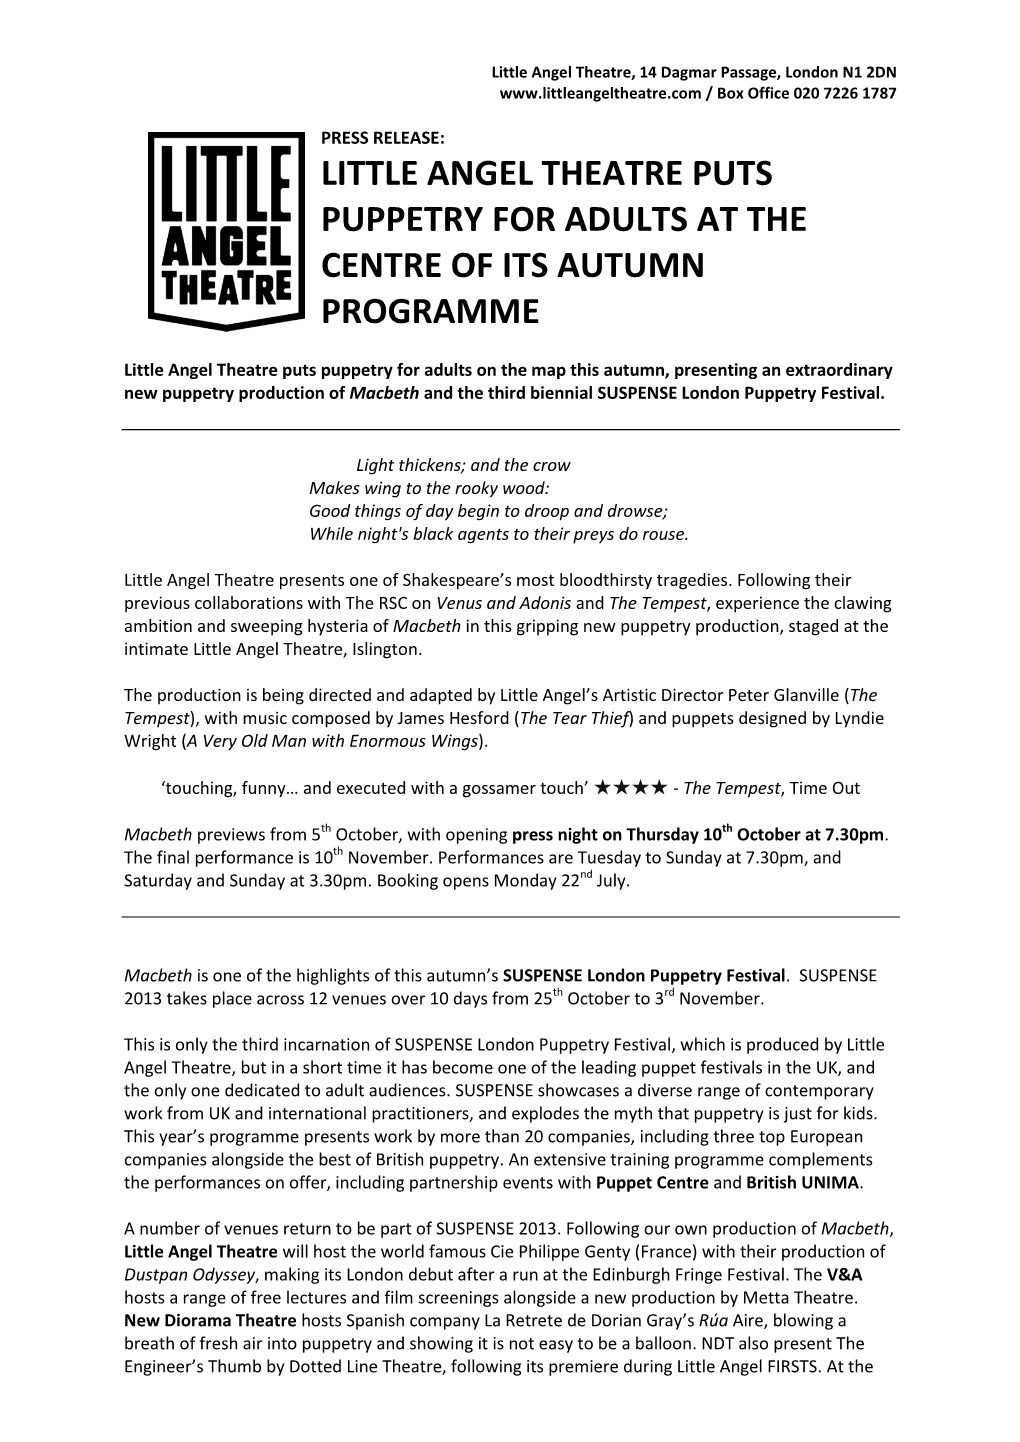 Little Angel Theatre Puts Puppetry for Adults at the Centre of Its Autumn Programme